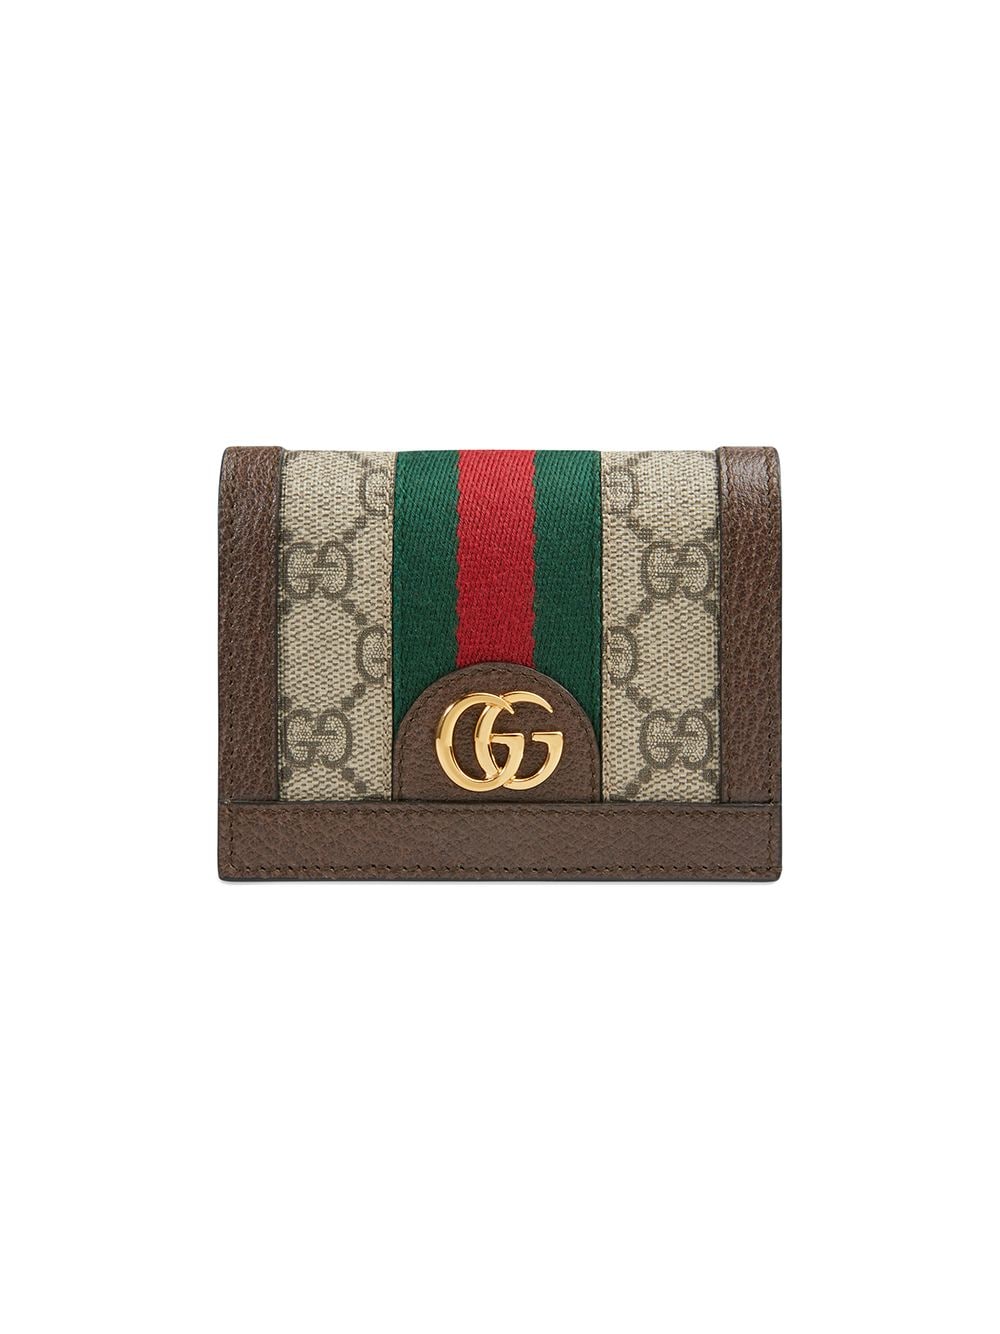 GUCCI OPHIDIA GG SUPREME WALLET